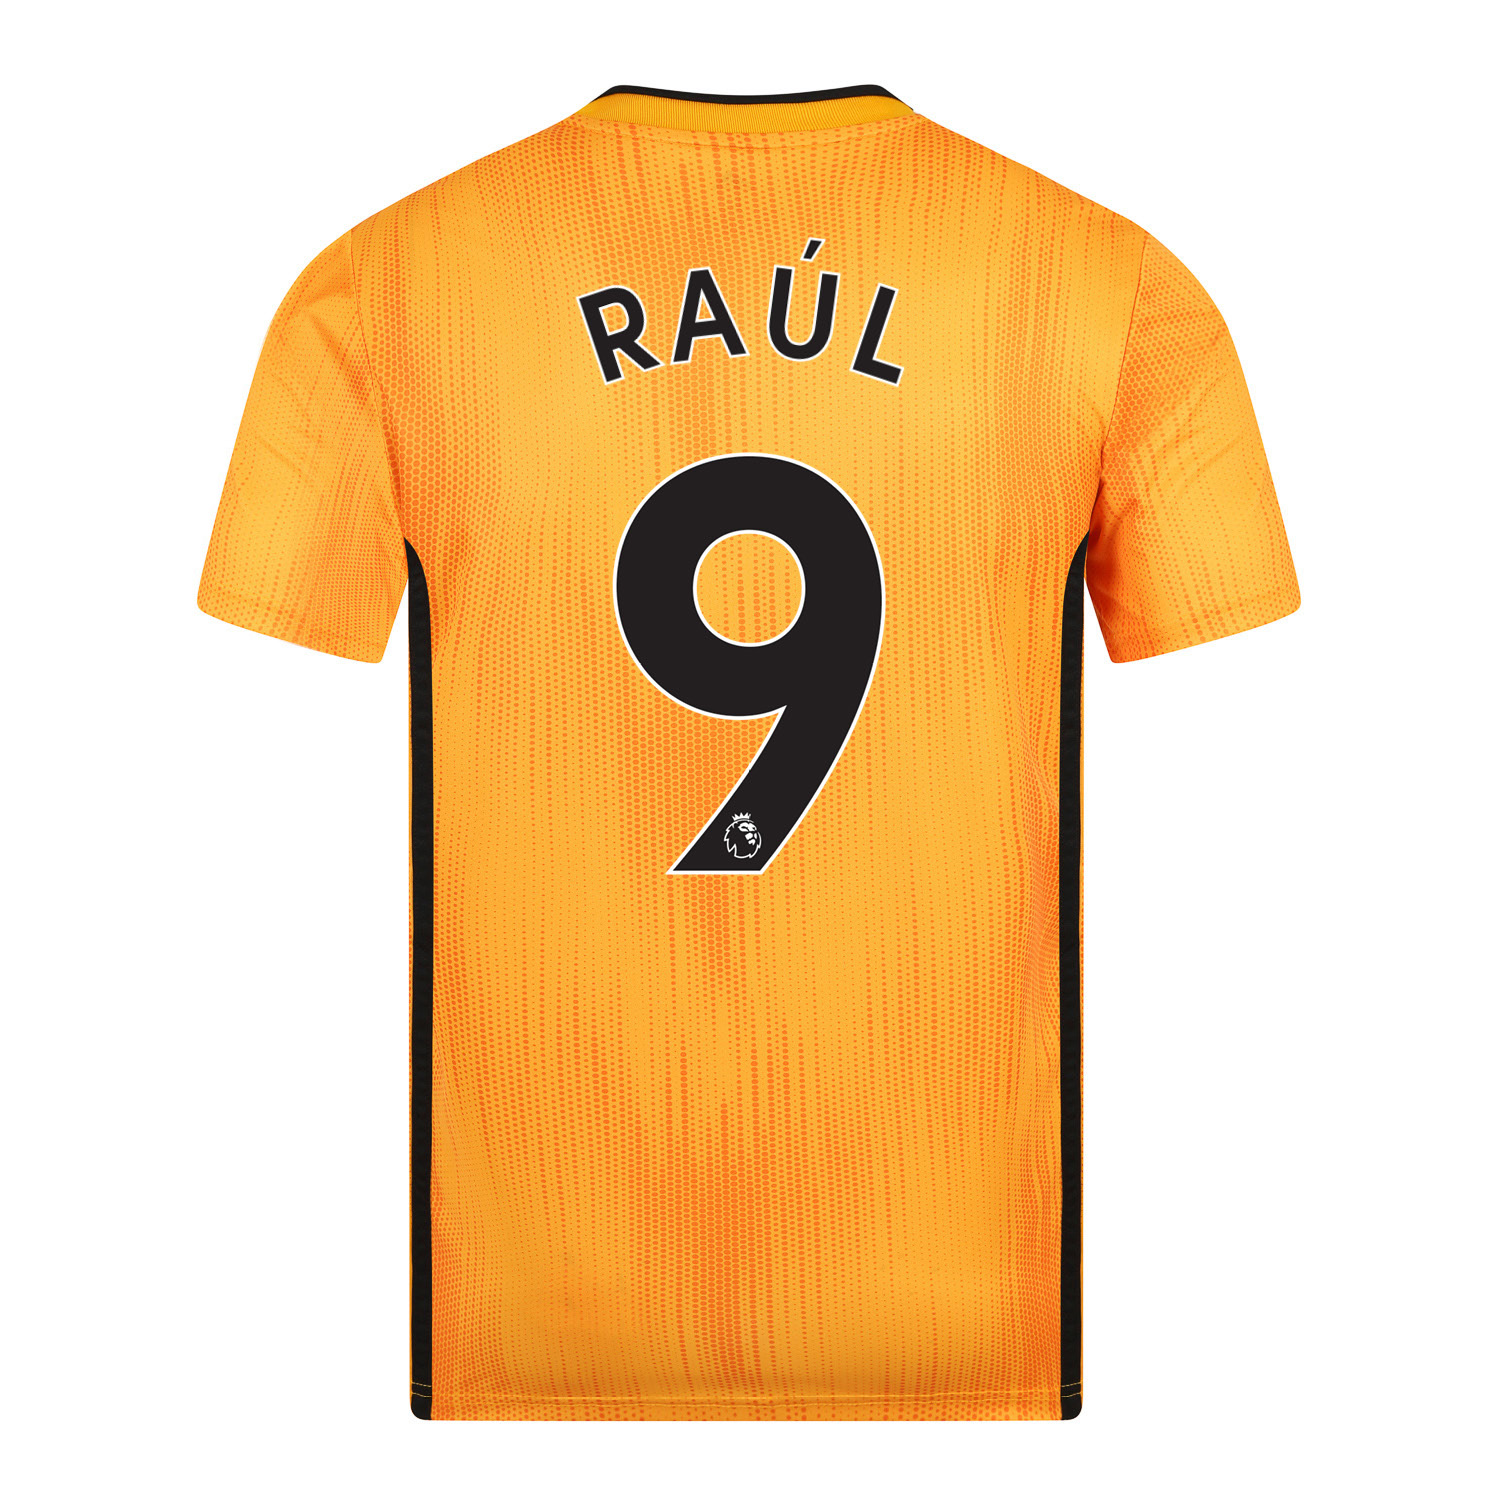 19-20 Wolves Home Shirt with RAUL Print 